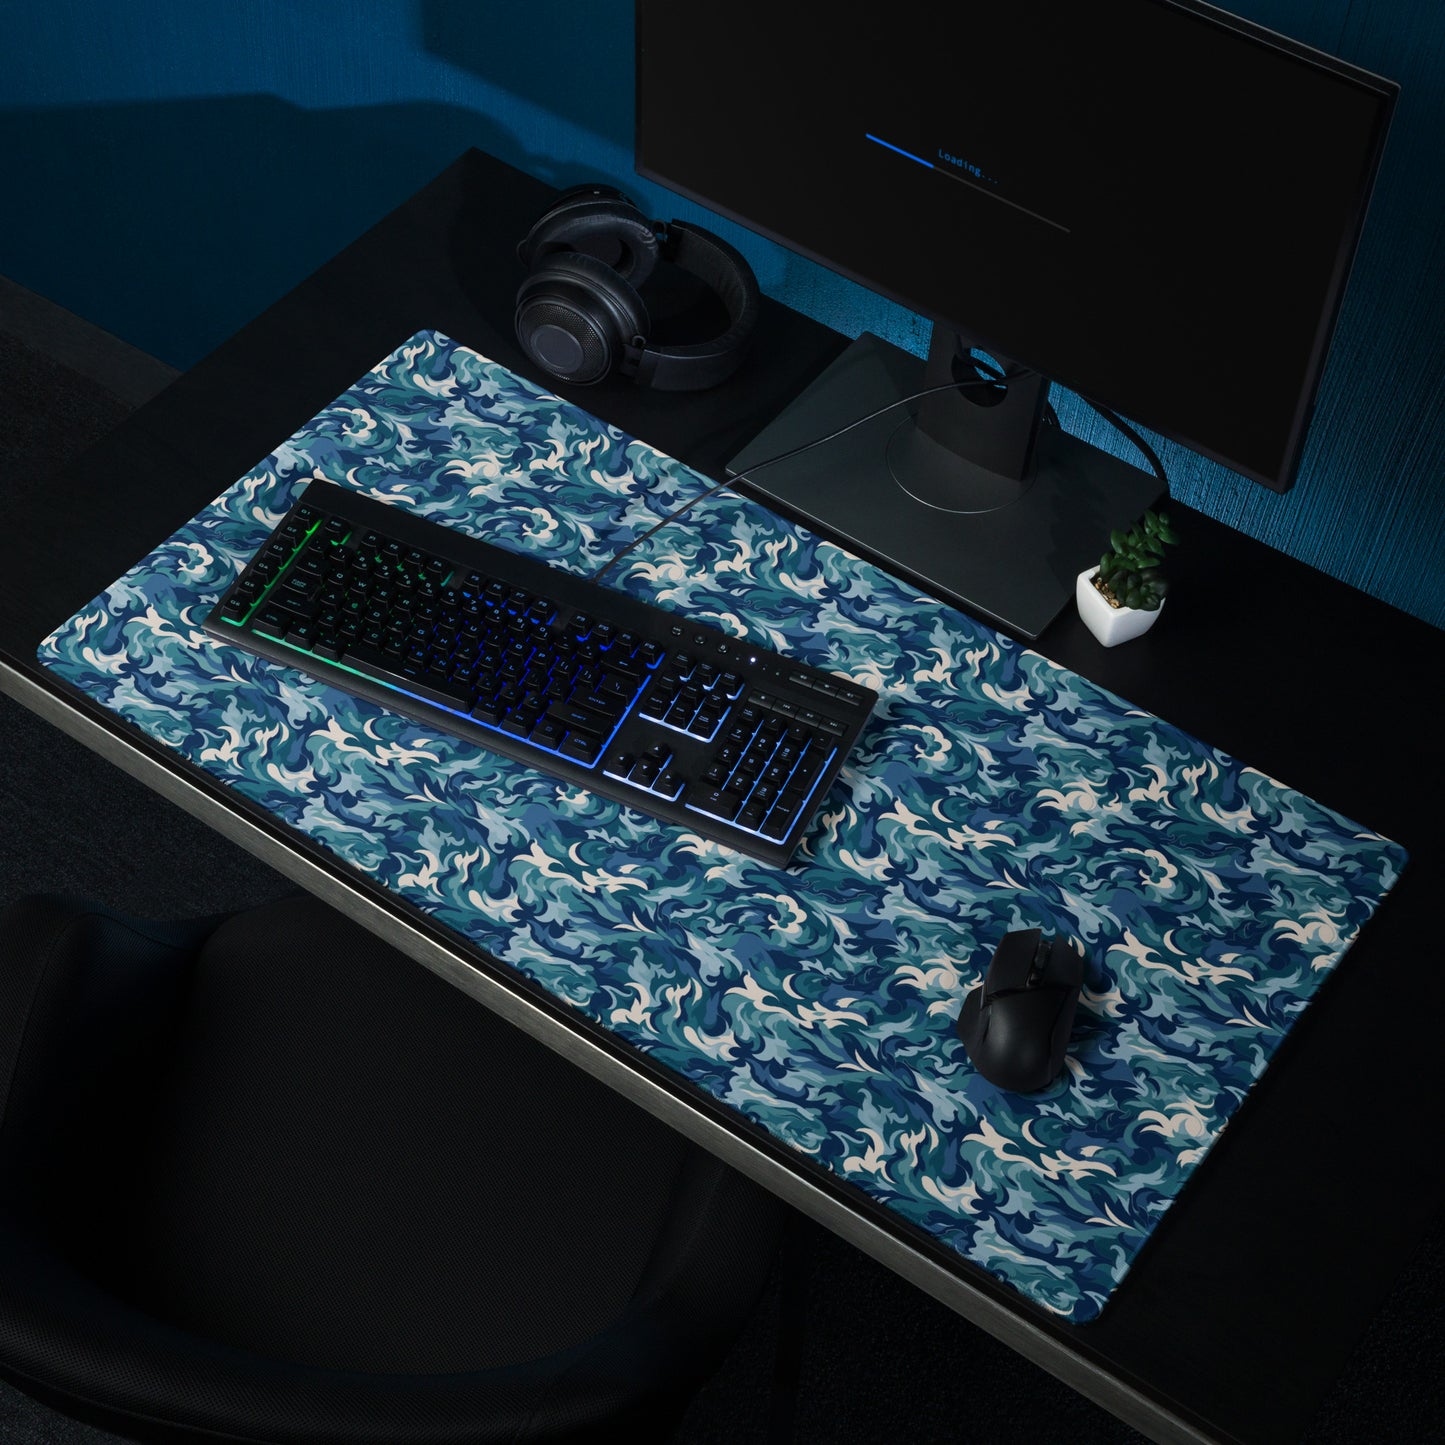 A 36" x 18" desk pad with a teal and white camo pattern sitting on a desk.